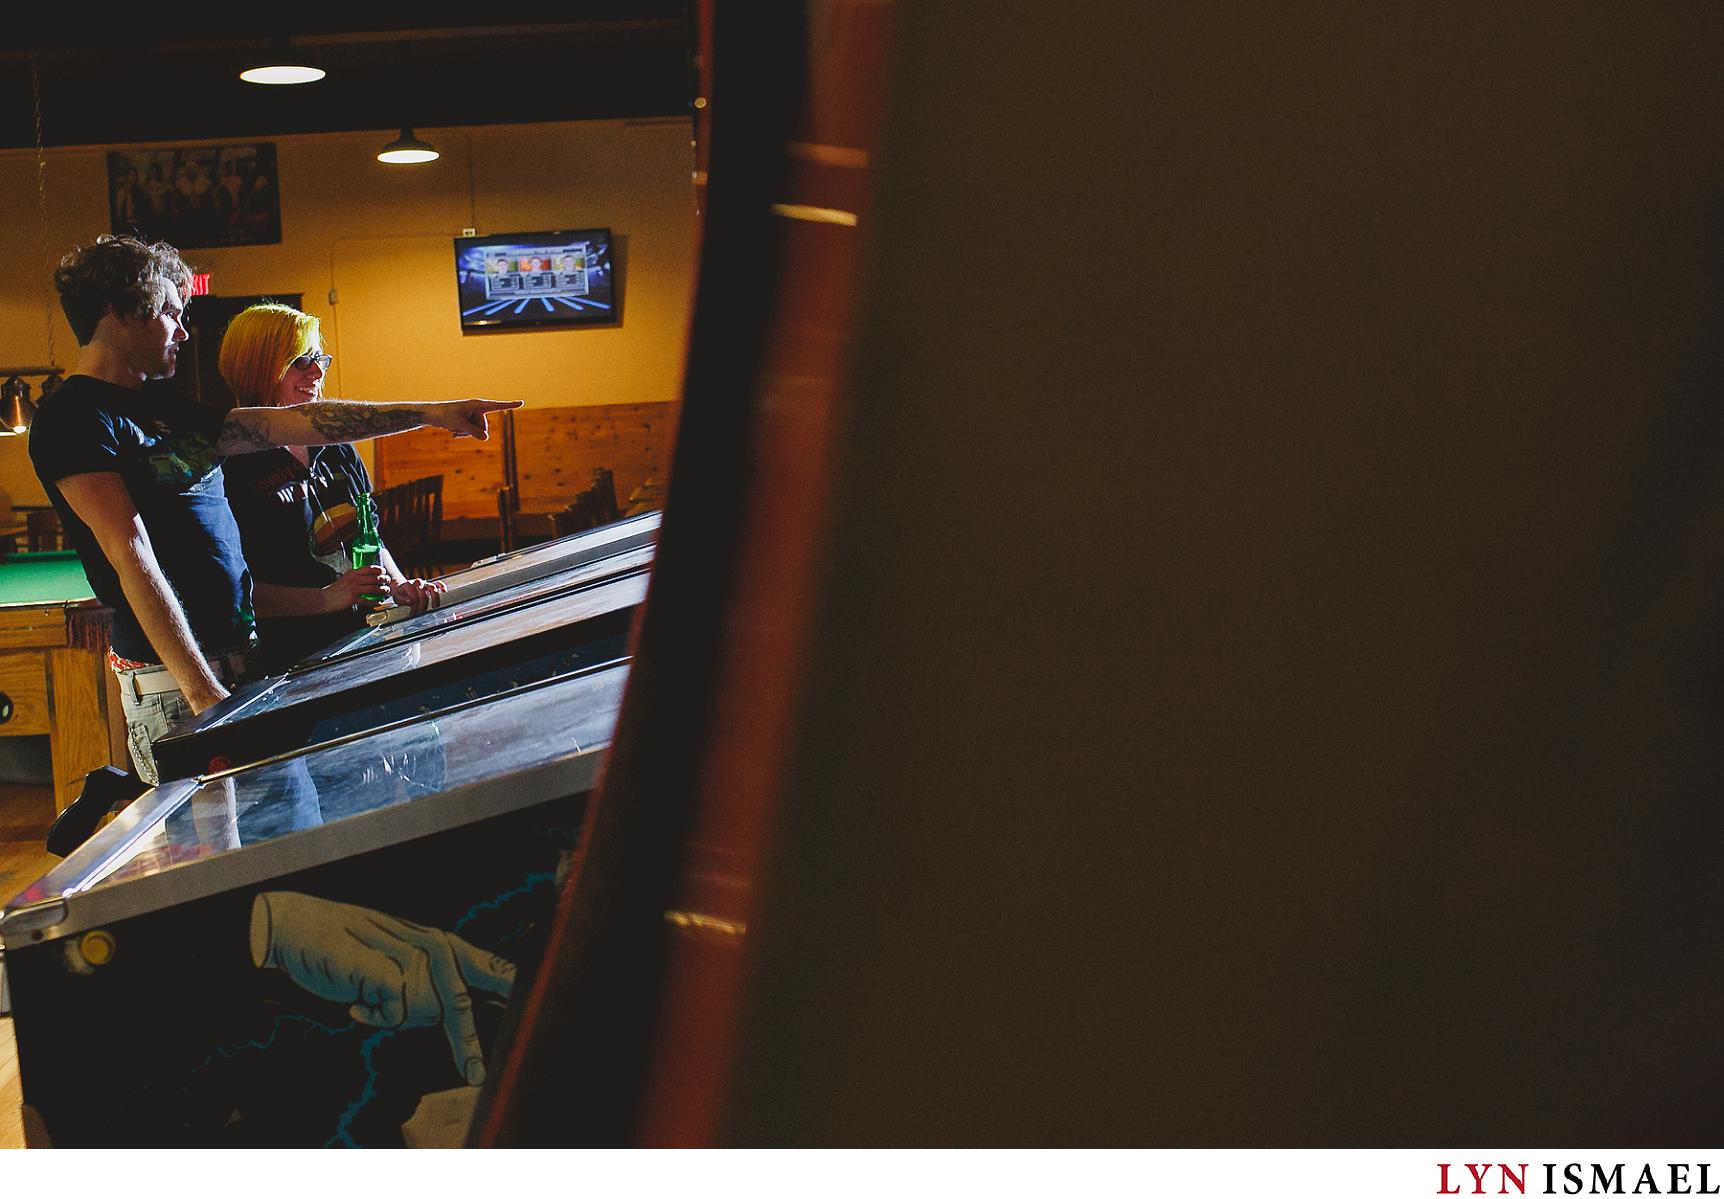 Wedding photographer Lyn Ismael photographs a couple re-enacting their first date by playing Pinball machines.